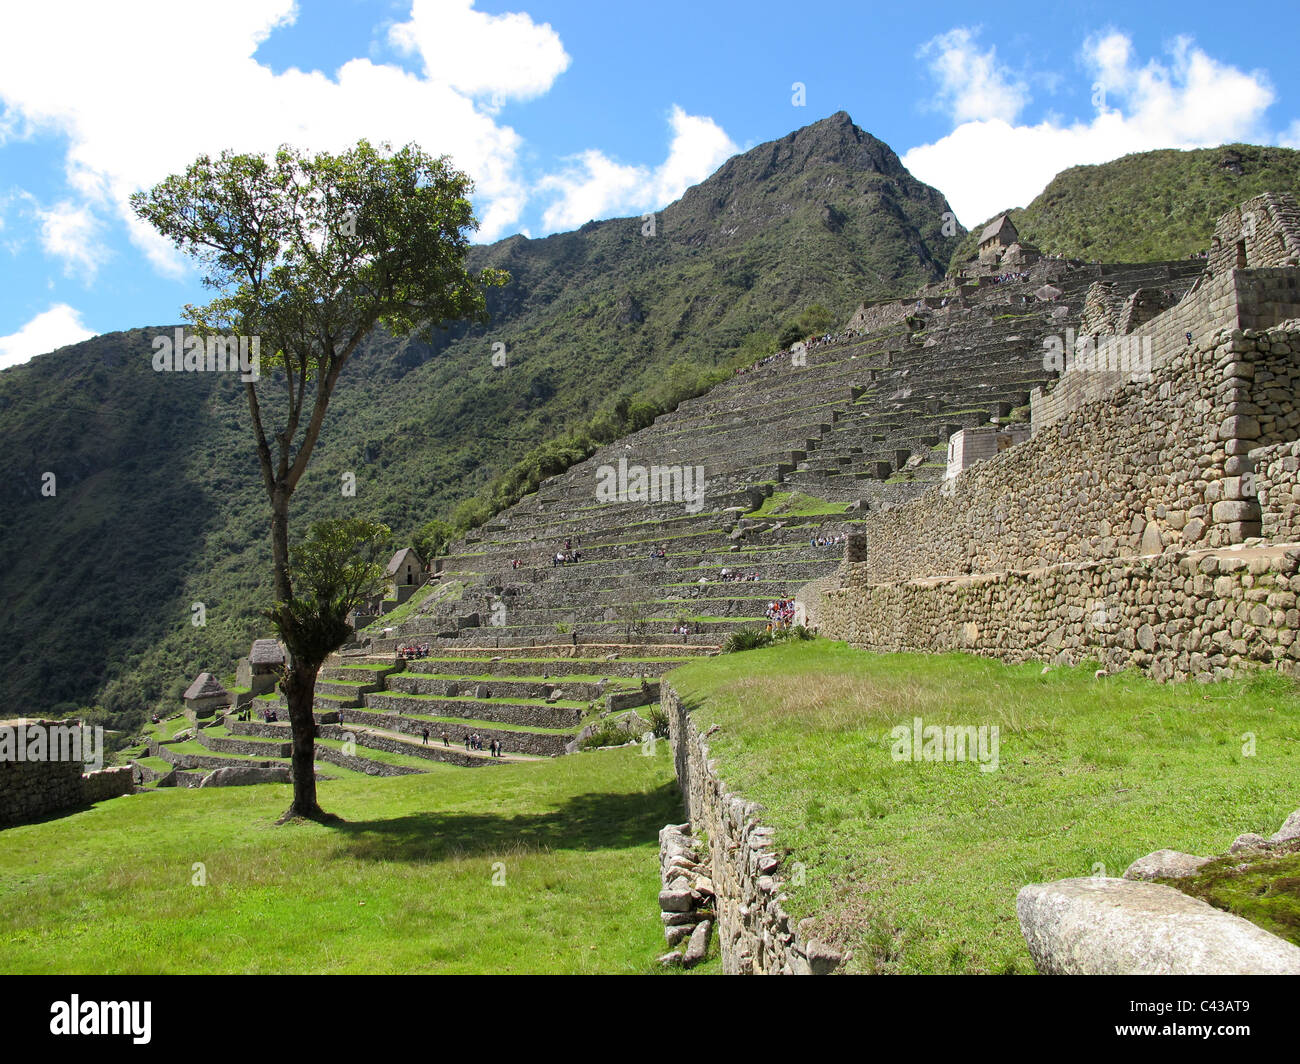 Terraces with tourists going up to the watchman's hut, Machu Picchu, Peru Stock Photo